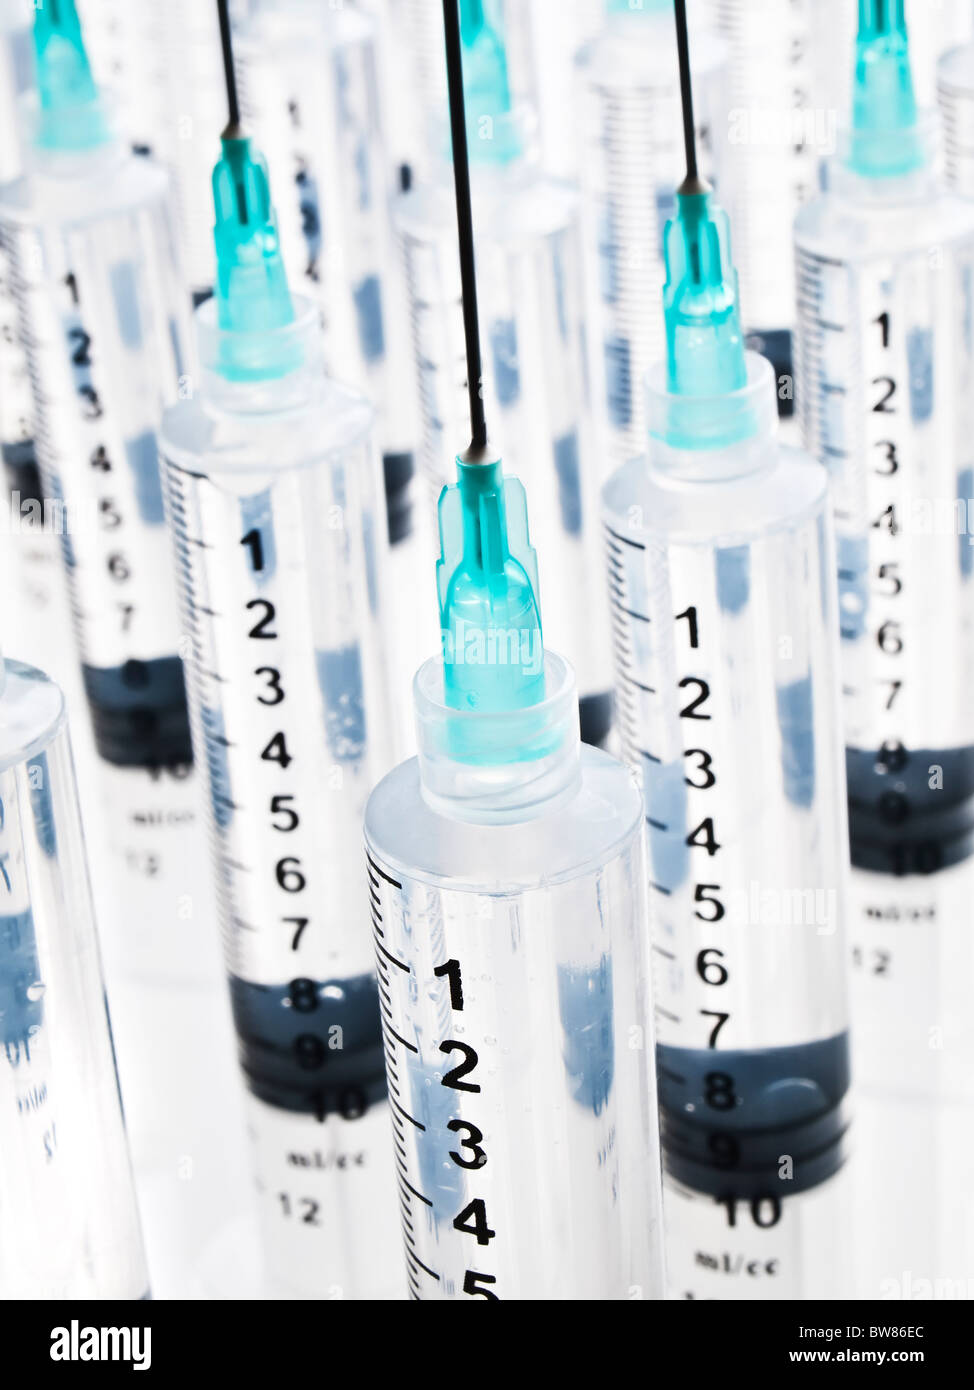 Multiple rows of syringes Stock Photo